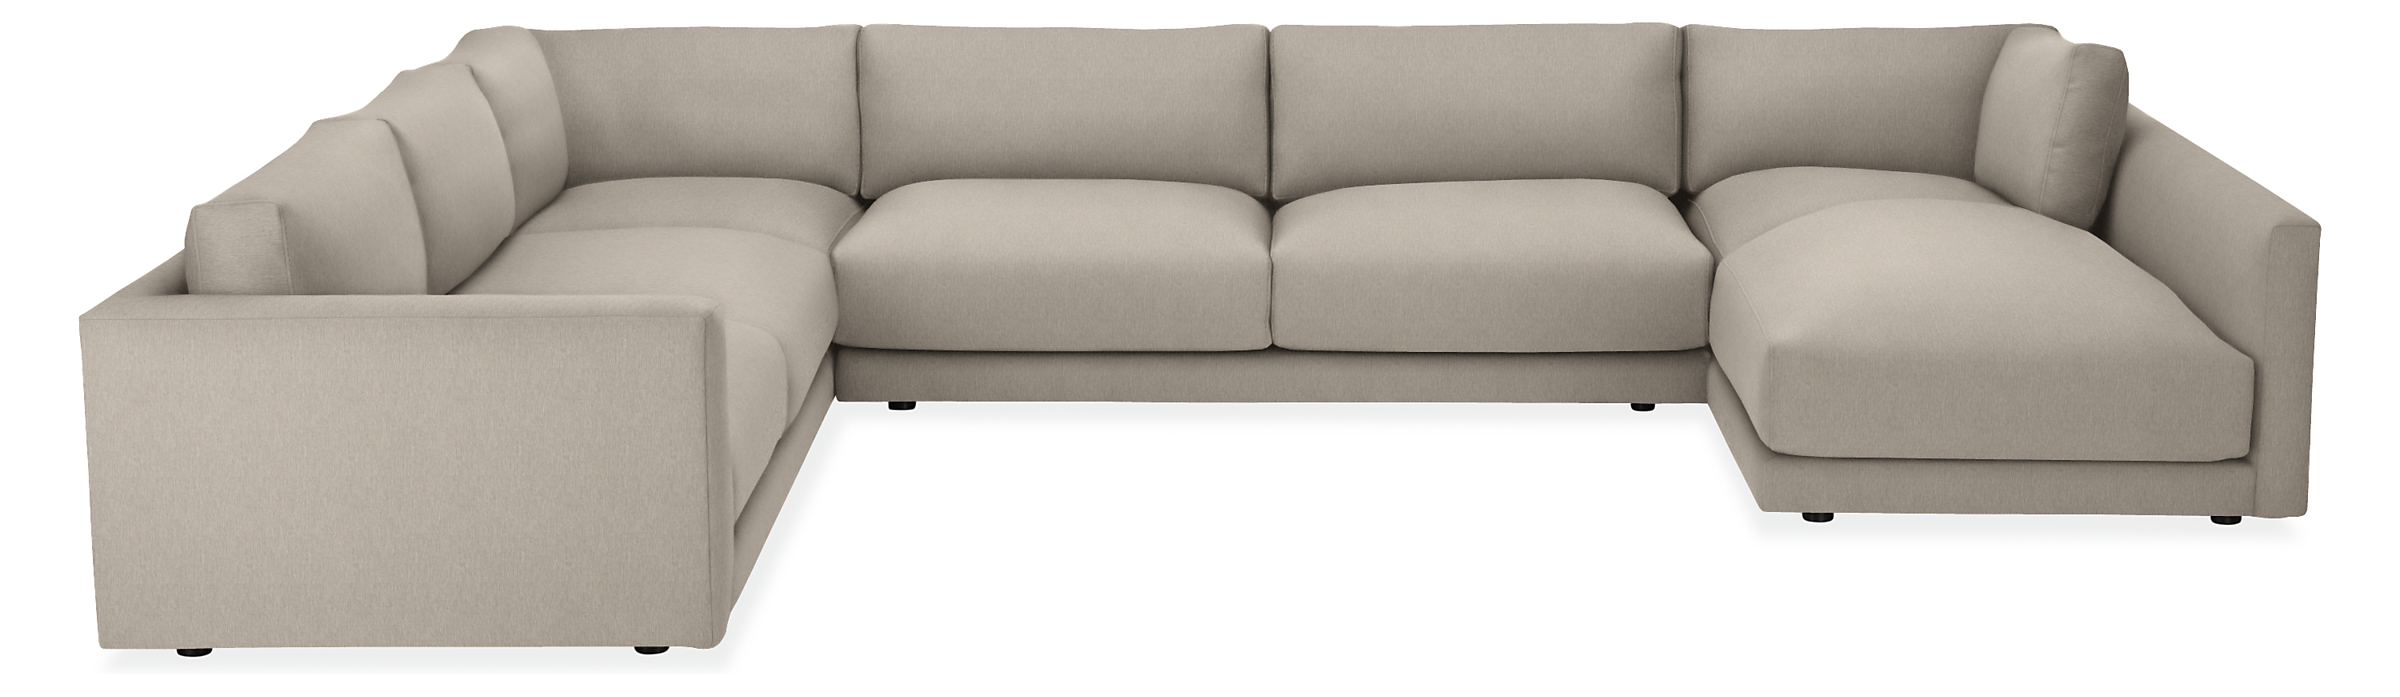 Clemens Deep 164x125" Four-PC Sectional w/Right-Arm Chaise